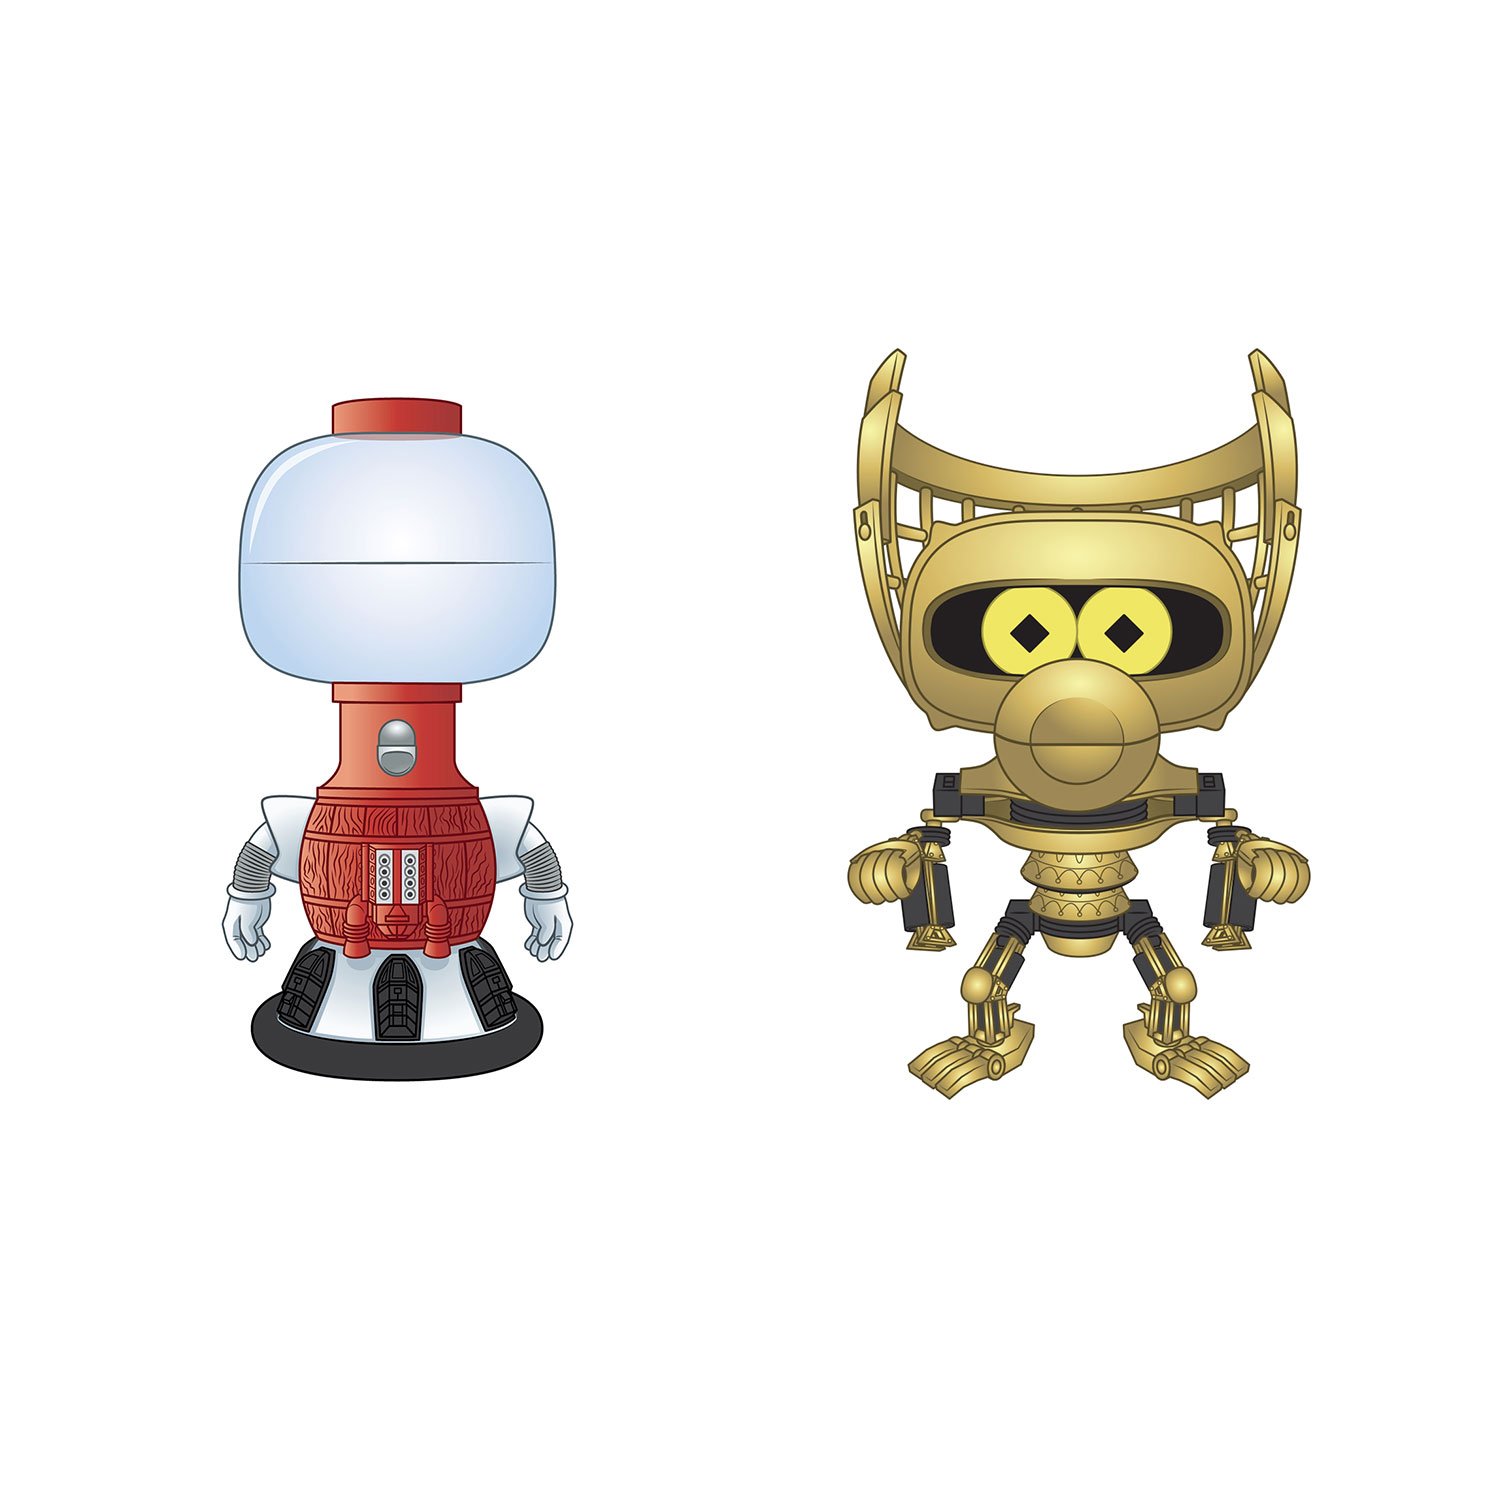 Here’s The 800 Or So Toys Funko Announced Yesterday